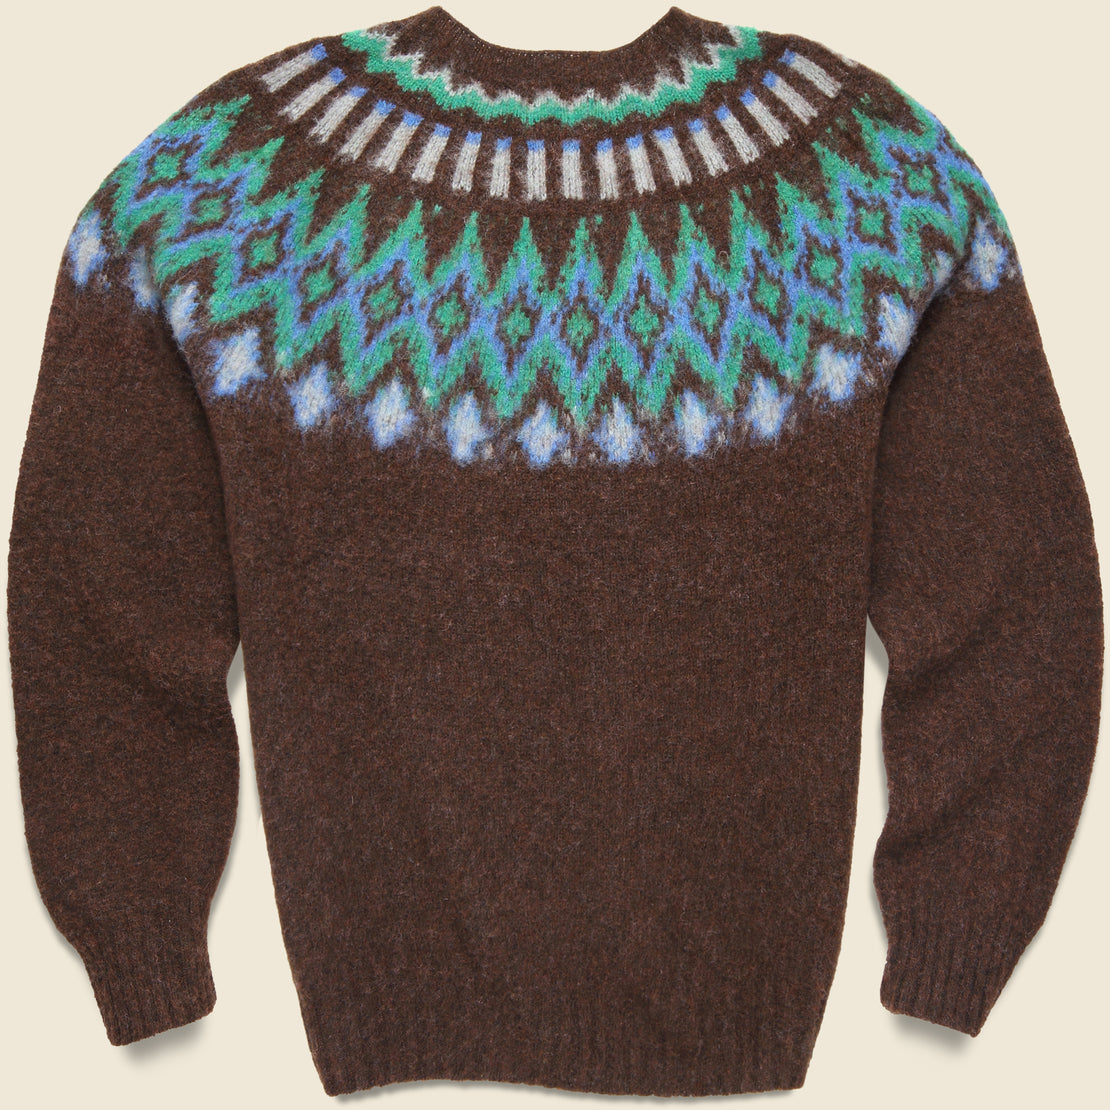 Future Fantasy Fair Isle Sweater - Brownish - Howlin - STAG Provisions - Tops - Sweater